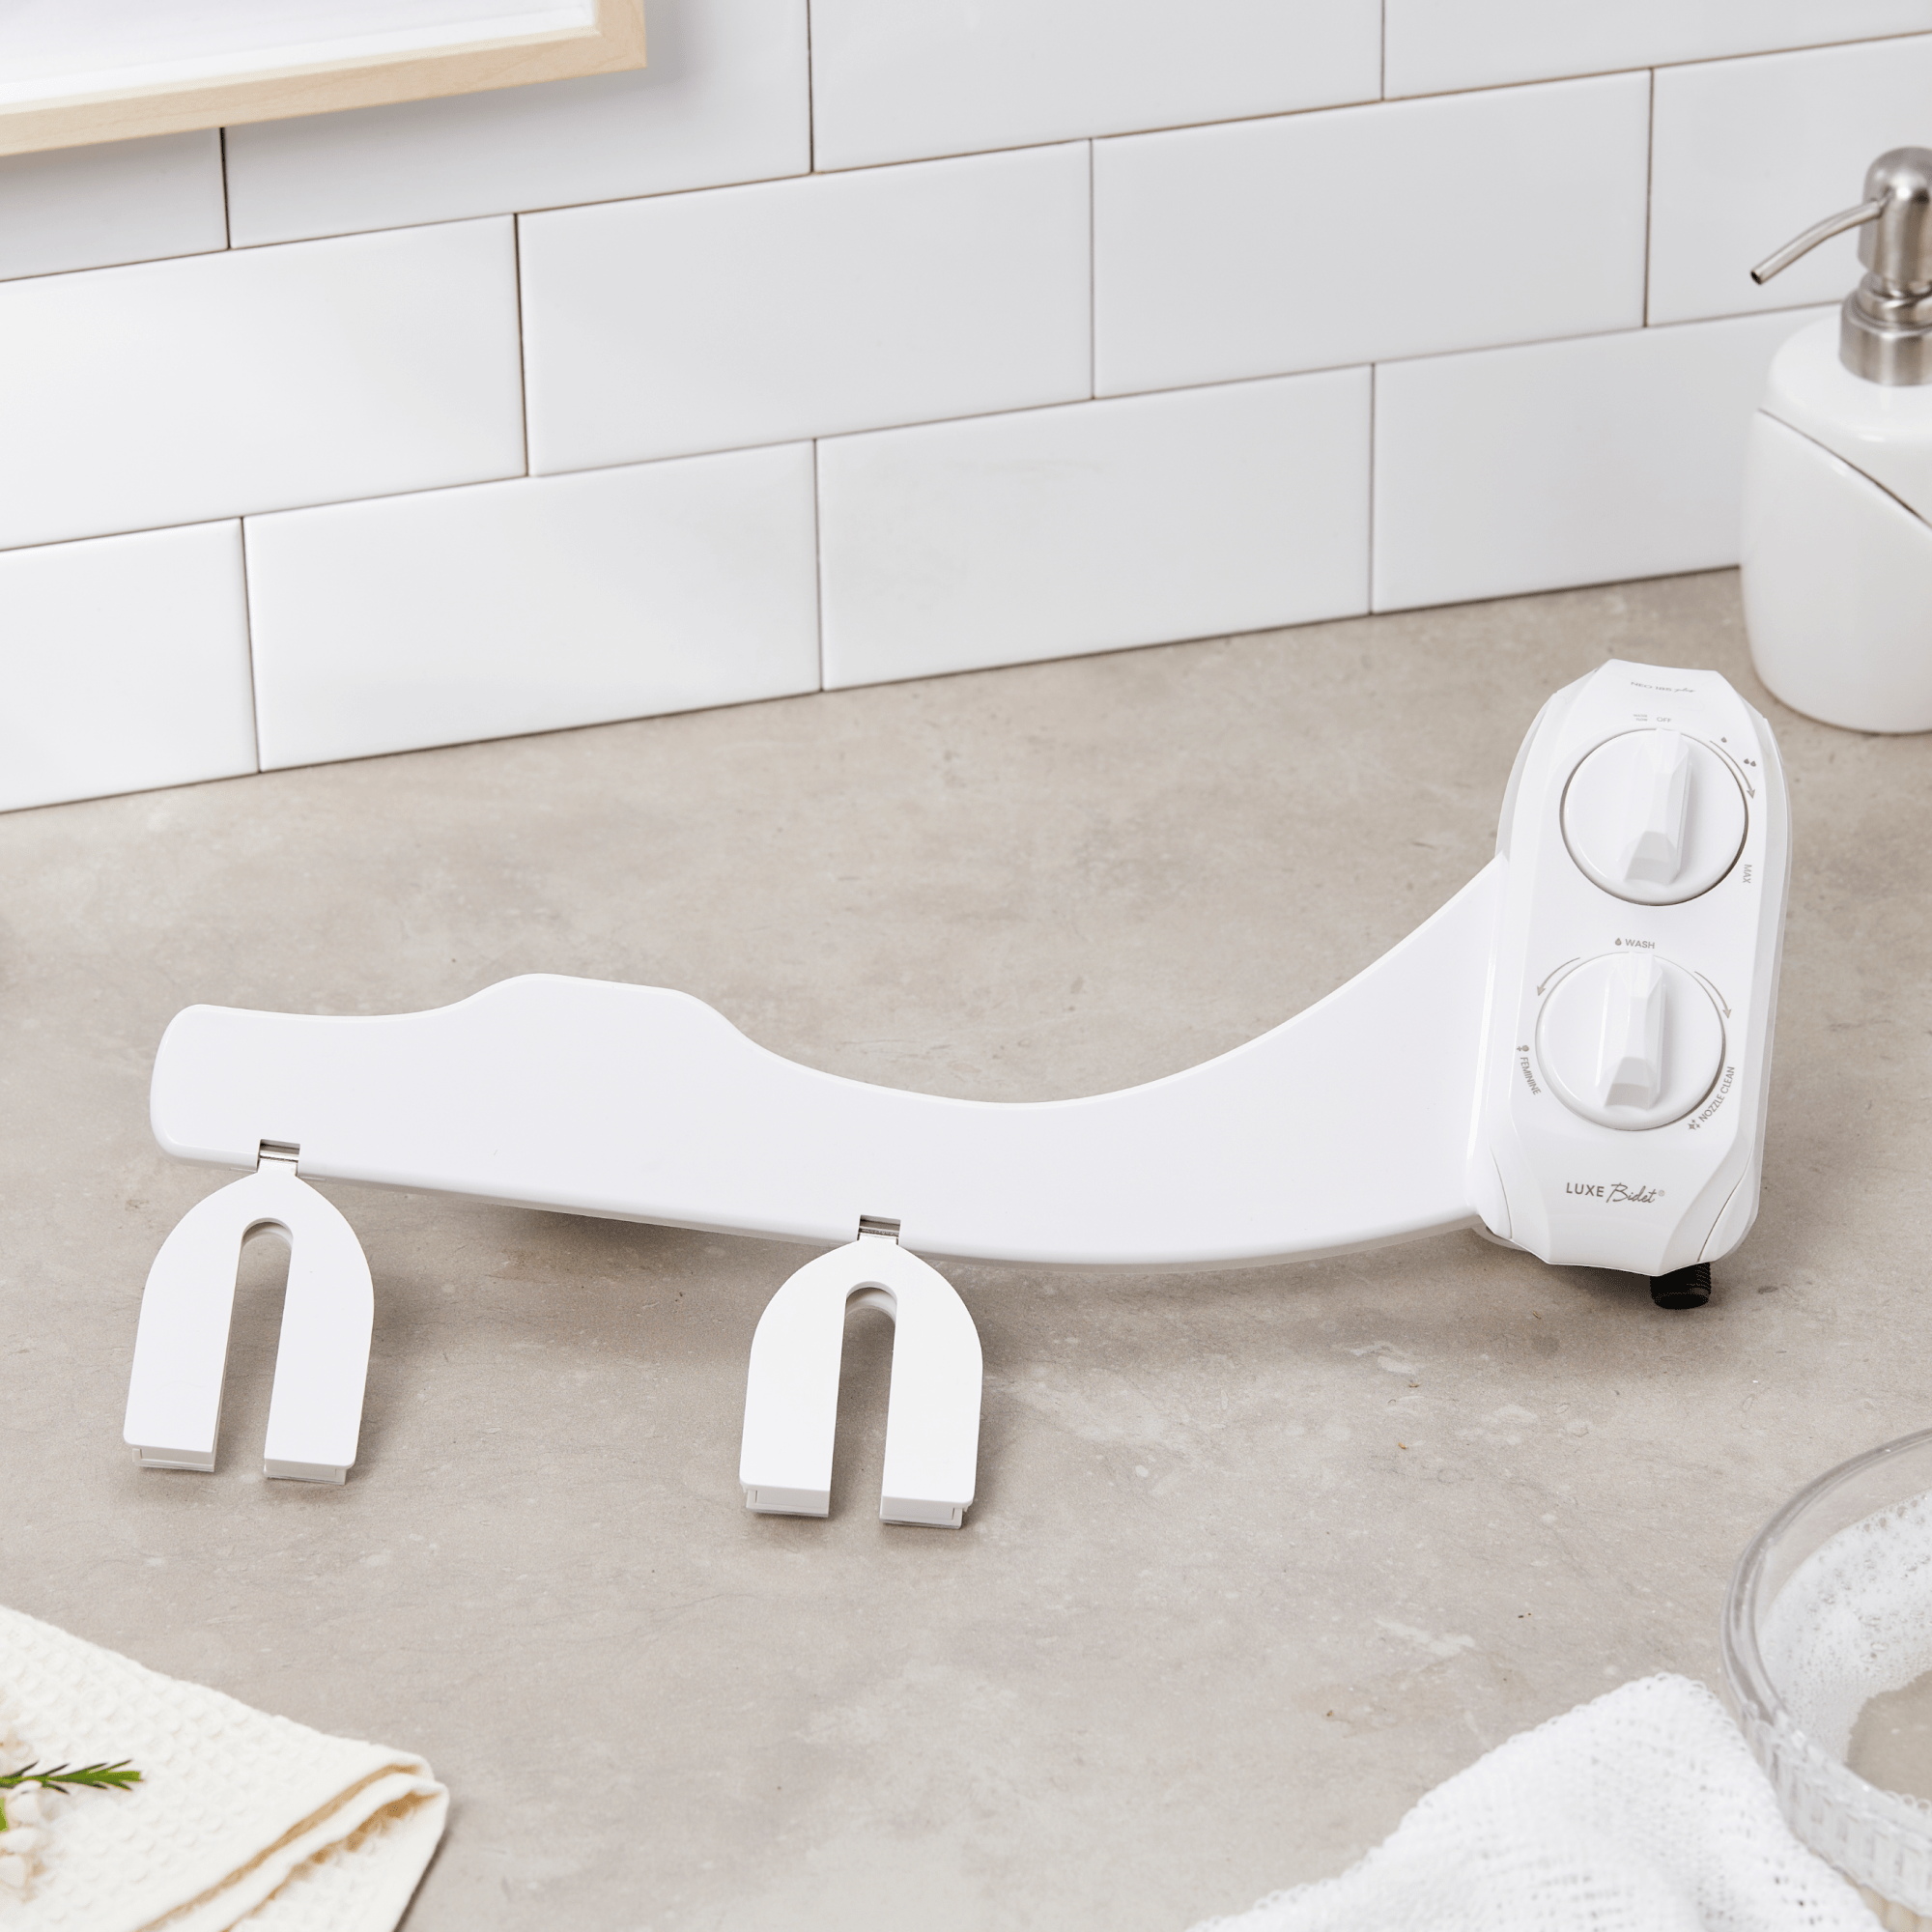 NEO 185 Plus White fits any bathroom style